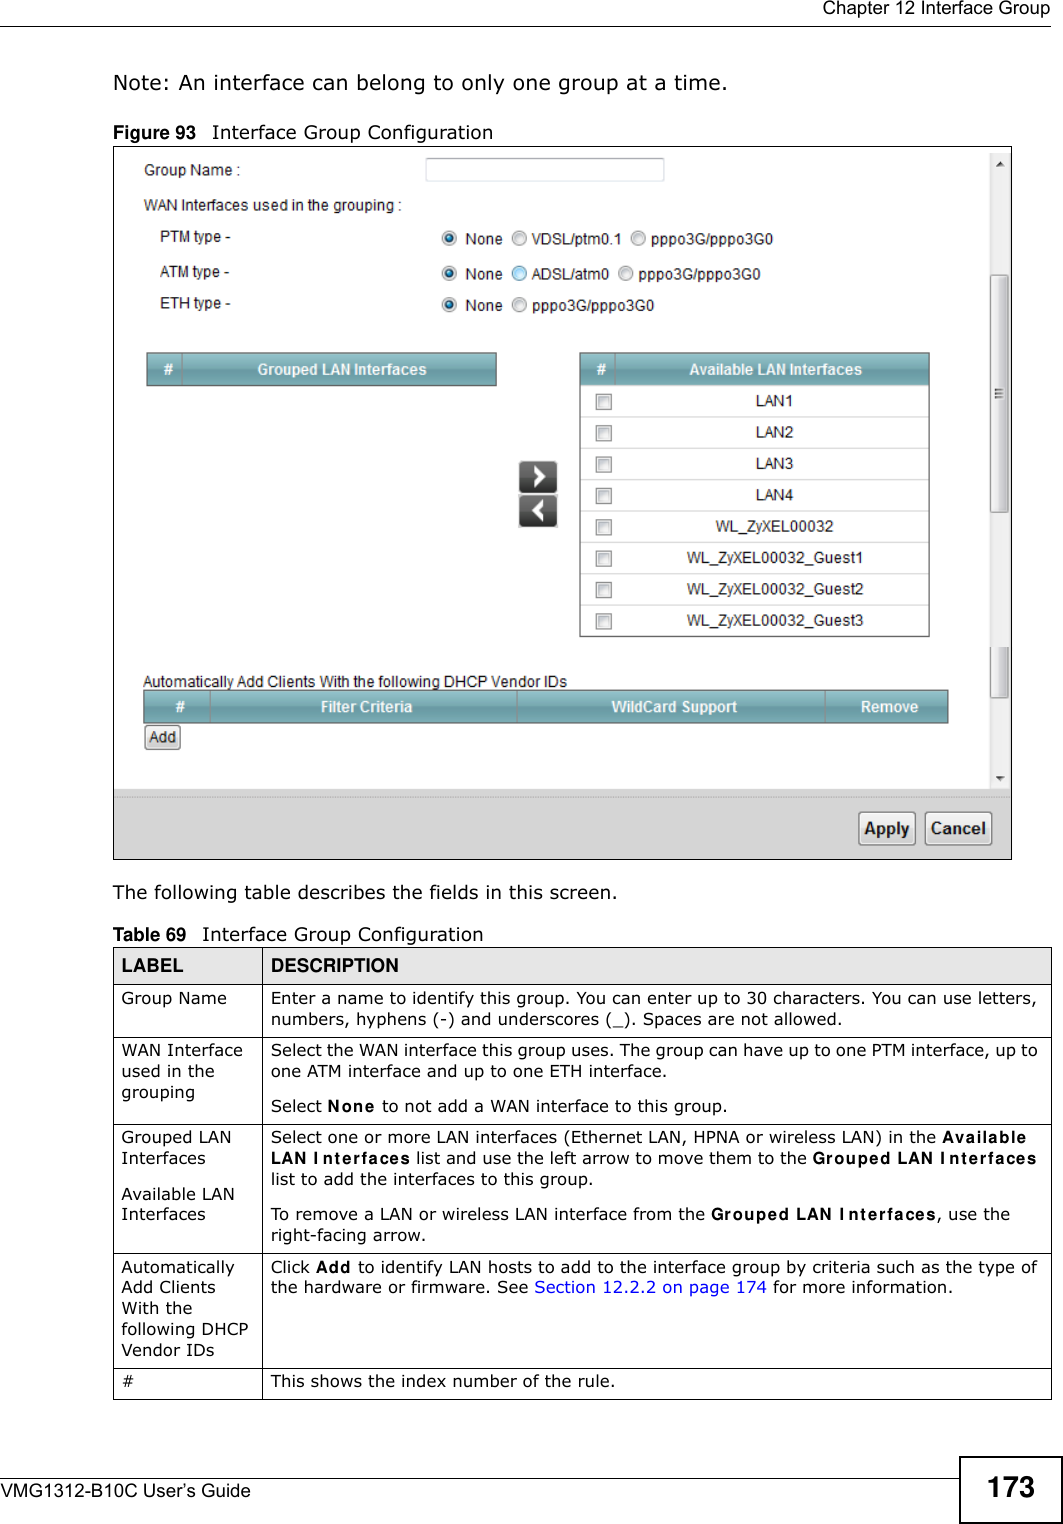  Chapter 12 Interface GroupVMG1312-B10C User’s Guide 173Note: An interface can belong to only one group at a time.Figure 93   Interface Group Configuration The following table describes the fields in this screen. Table 69   Interface Group ConfigurationLABEL DESCRIPTIONGroup Name Enter a name to identify this group. You can enter up to 30 characters. You can use letters, numbers, hyphens (-) and underscores (_). Spaces are not allowed.WAN Interface used in the groupingSelect the WAN interface this group uses. The group can have up to one PTM interface, up to one ATM interface and up to one ETH interface.Select N on e to not add a WAN interface to this group.Grouped LAN InterfacesAvailable LAN InterfacesSelect one or more LAN interfaces (Ethernet LAN, HPNA or wireless LAN) in the Ava ila ble  LAN  I n t e r fa ces list and use the left arrow to move them to the Grou pe d LAN  I nt er face s list to add the interfaces to this group.To remove a LAN or wireless LAN interface from the Grouped LAN  I nt e rfaces, use the right-facing arrow.Automatically Add Clients With the following DHCP Vendor IDsClick Add to identify LAN hosts to add to the interface group by criteria such as the type of the hardware or firmware. See Section 12.2.2 on page 174 for more information.#This shows the index number of the rule.